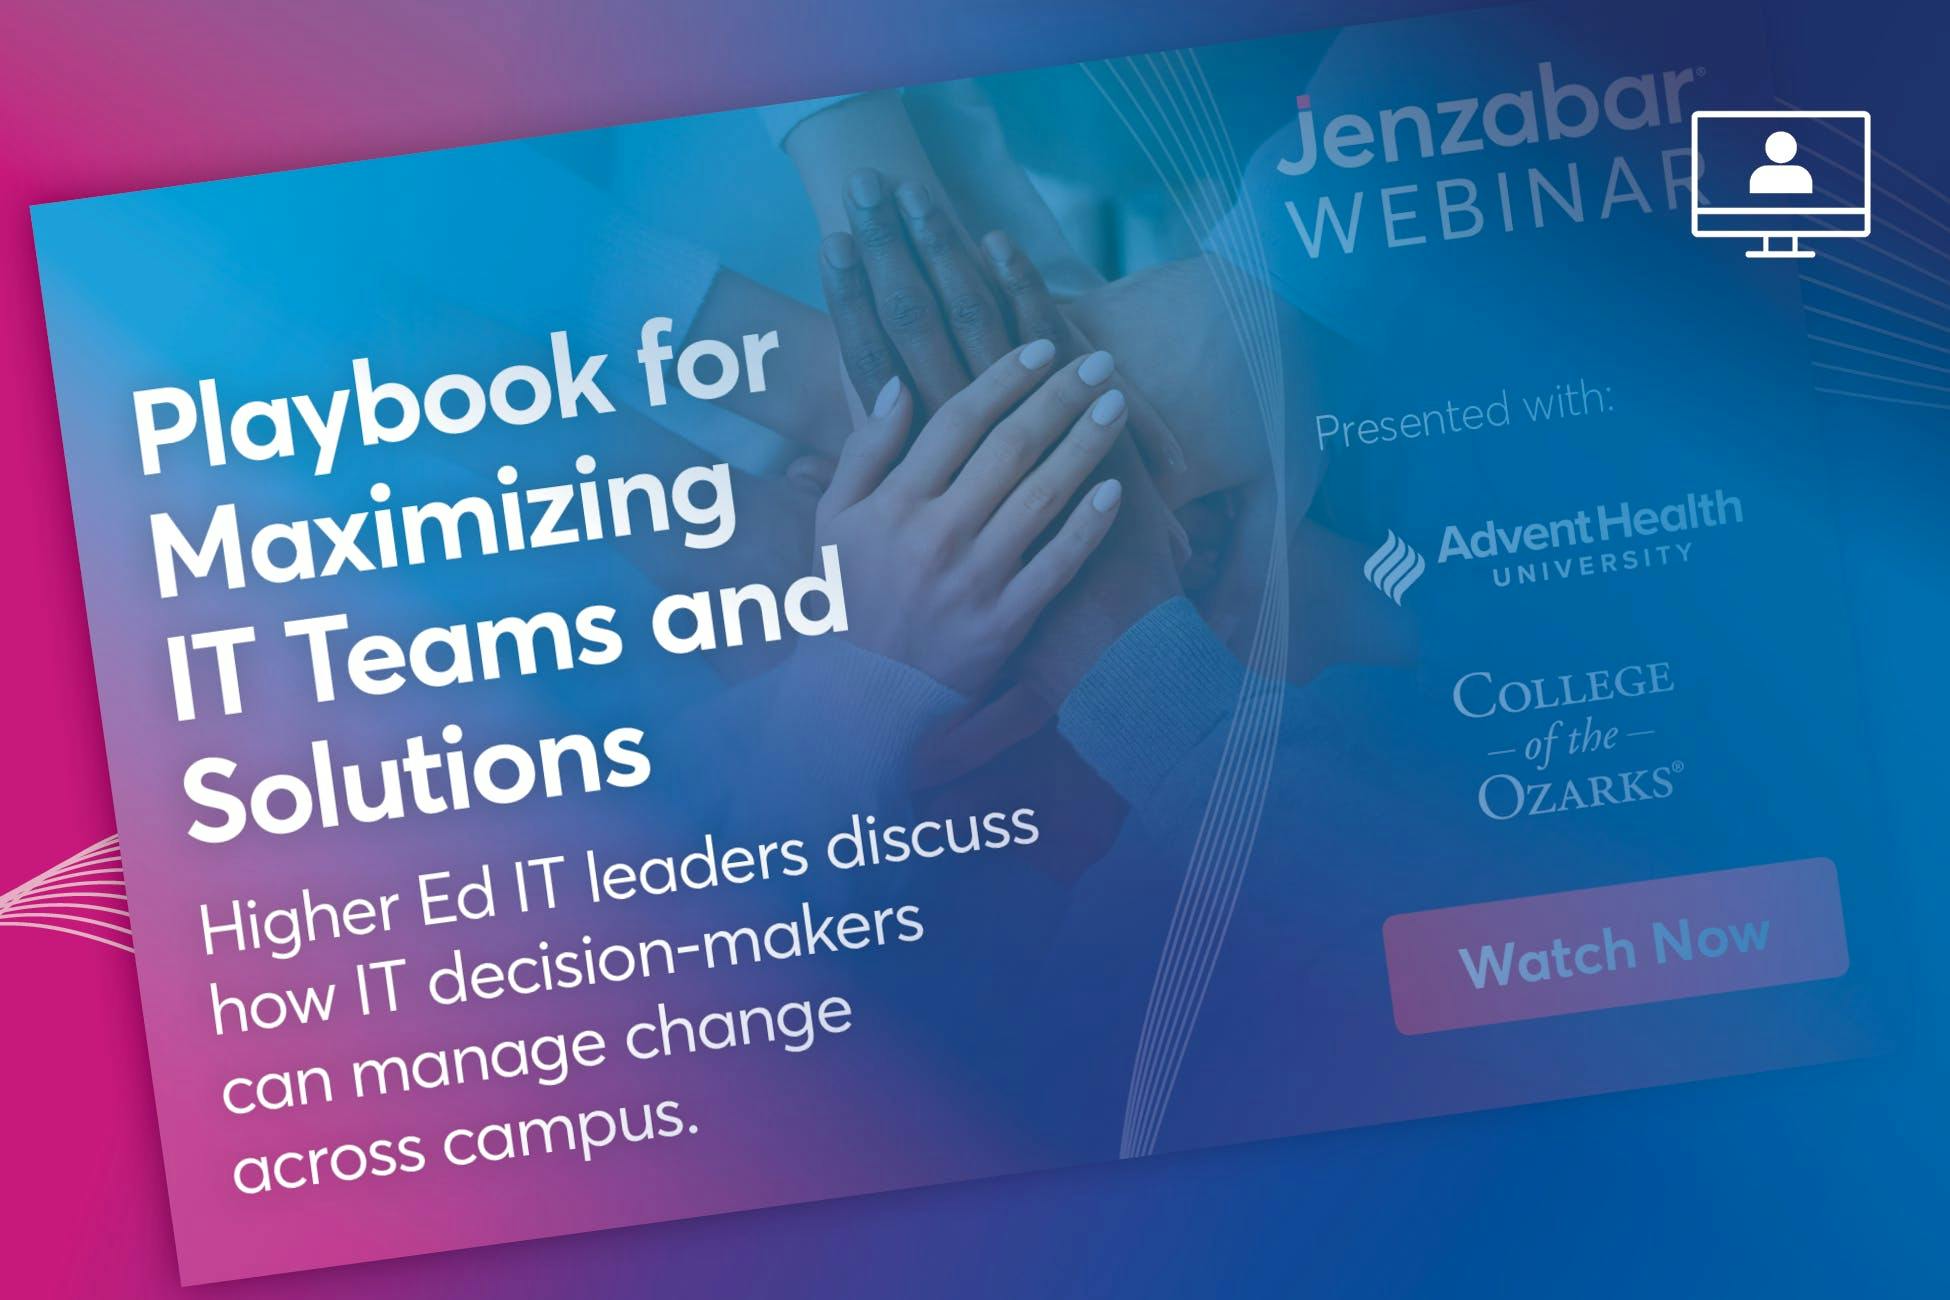 Webinar: Playbook for Maximizing IT Teams and Solutions